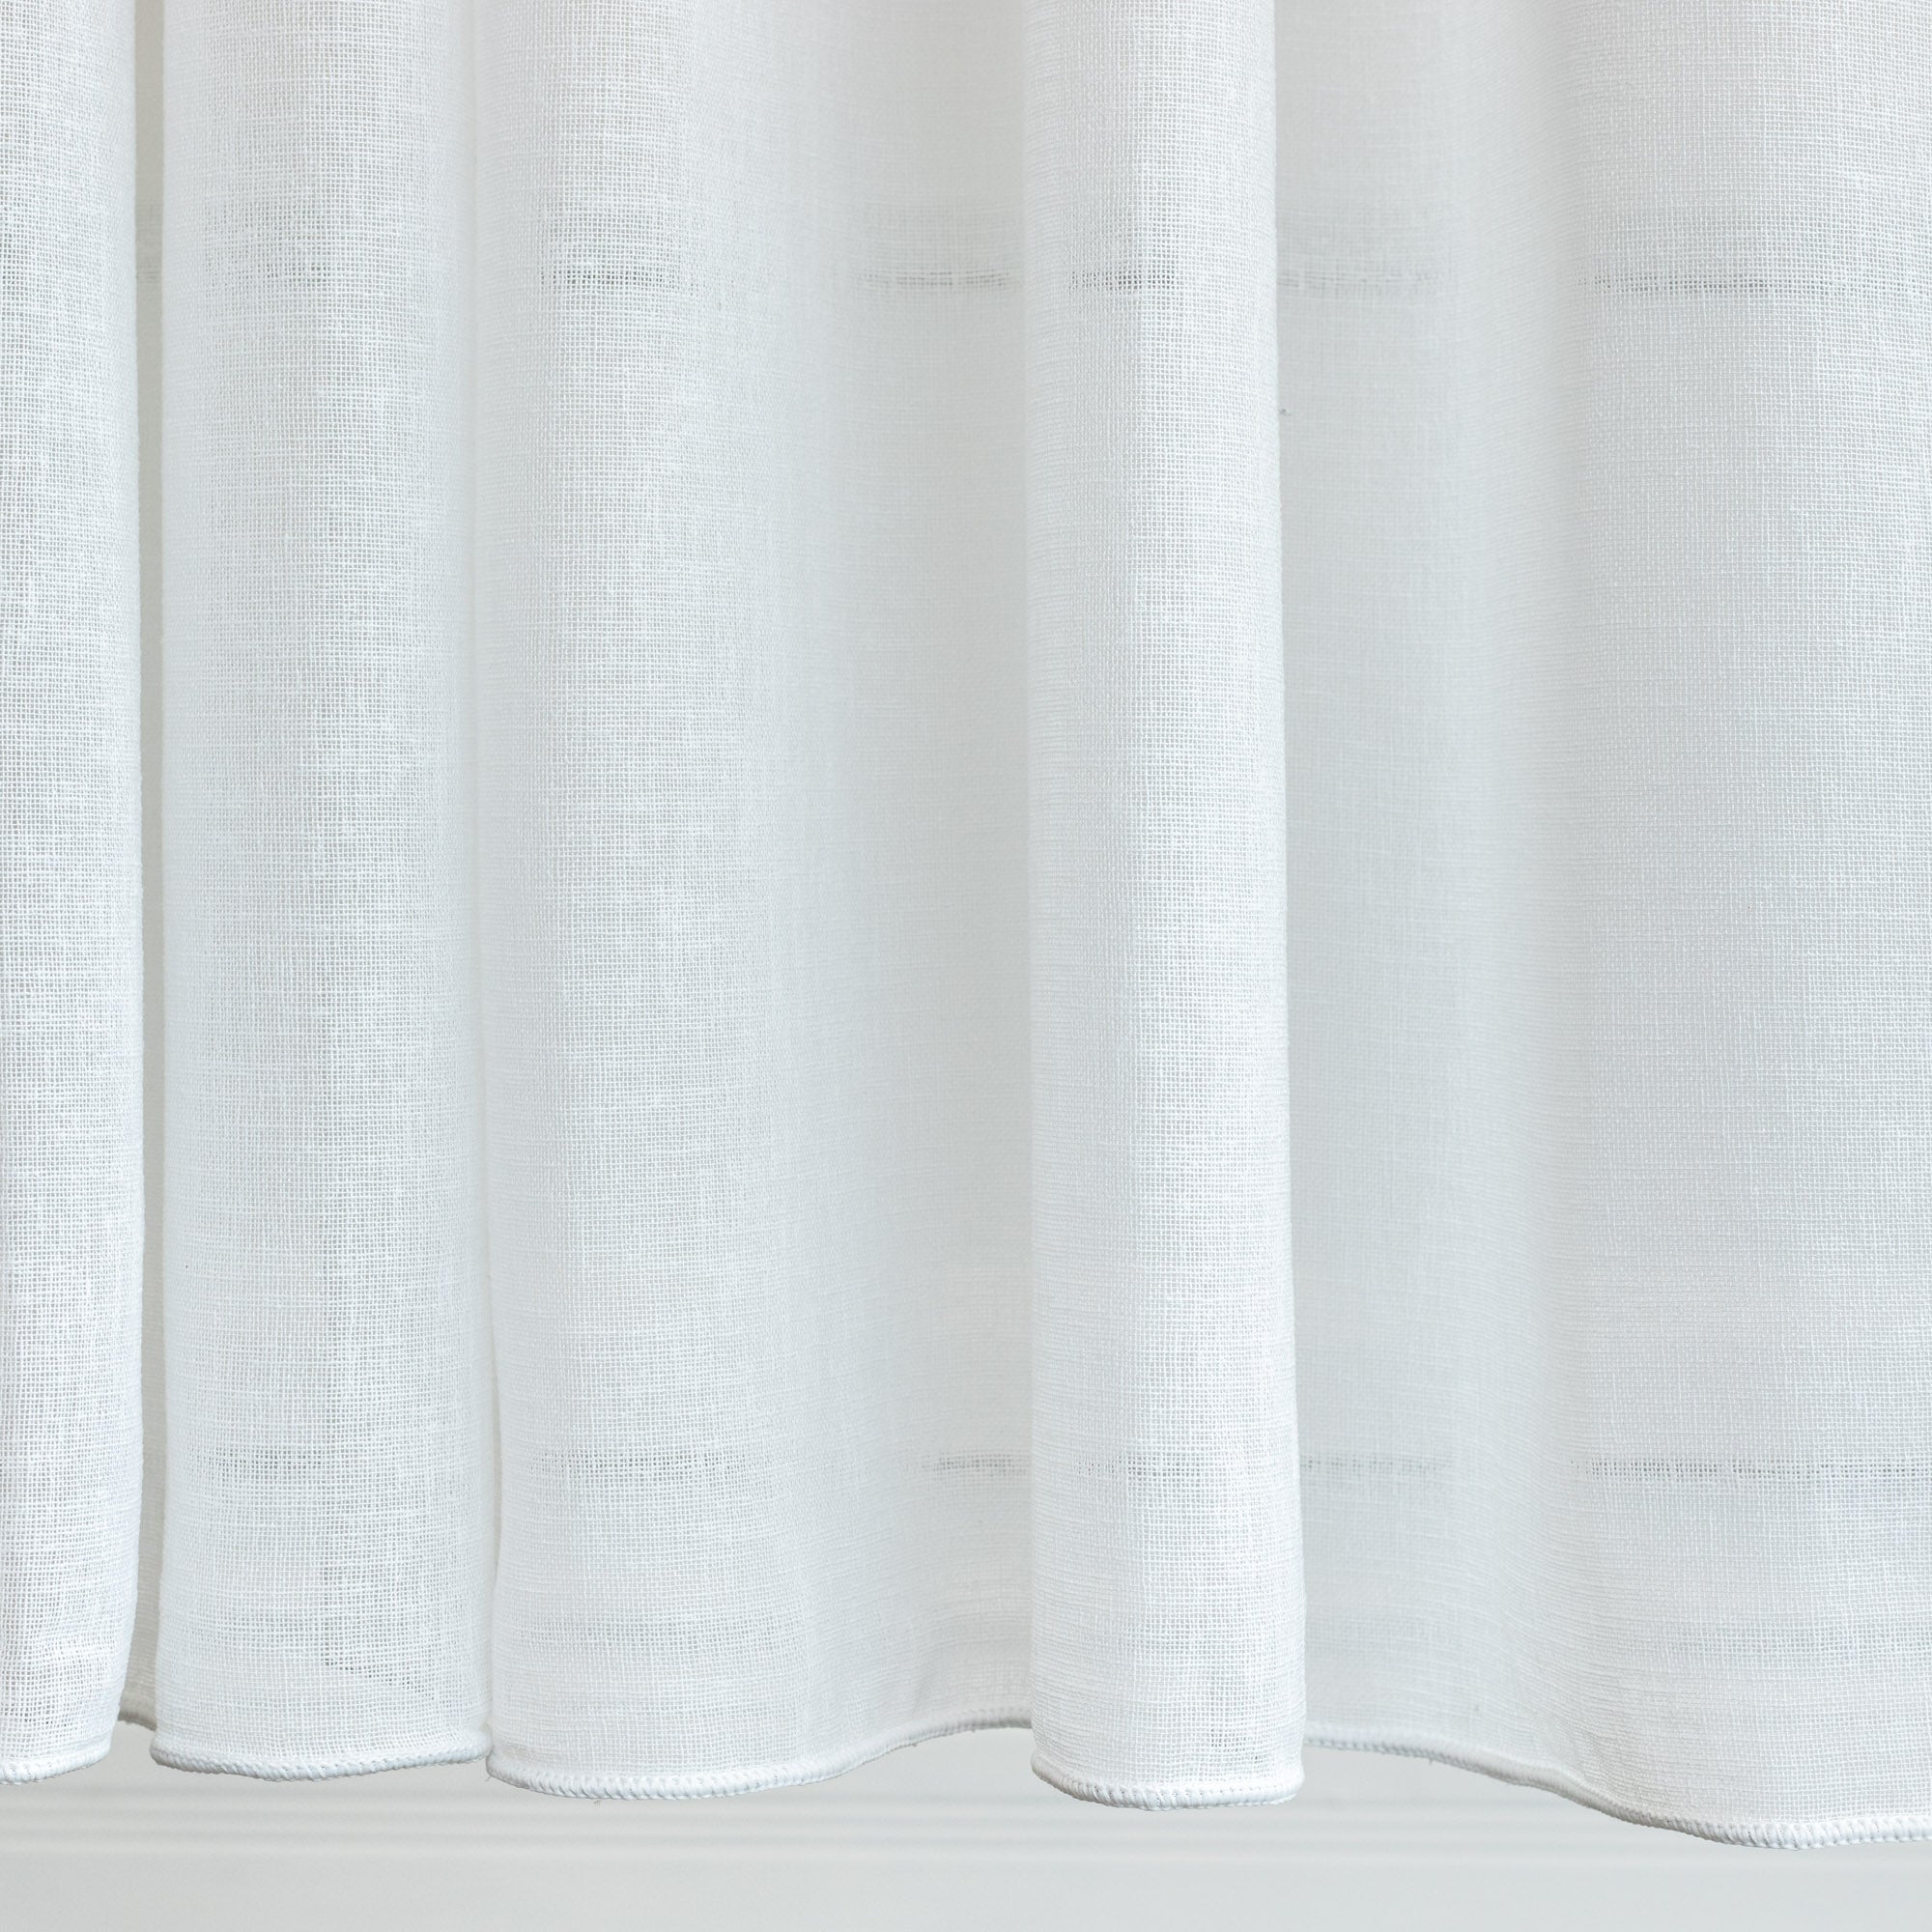 a soft white sheer drapery fabric : close up view of weighted edge